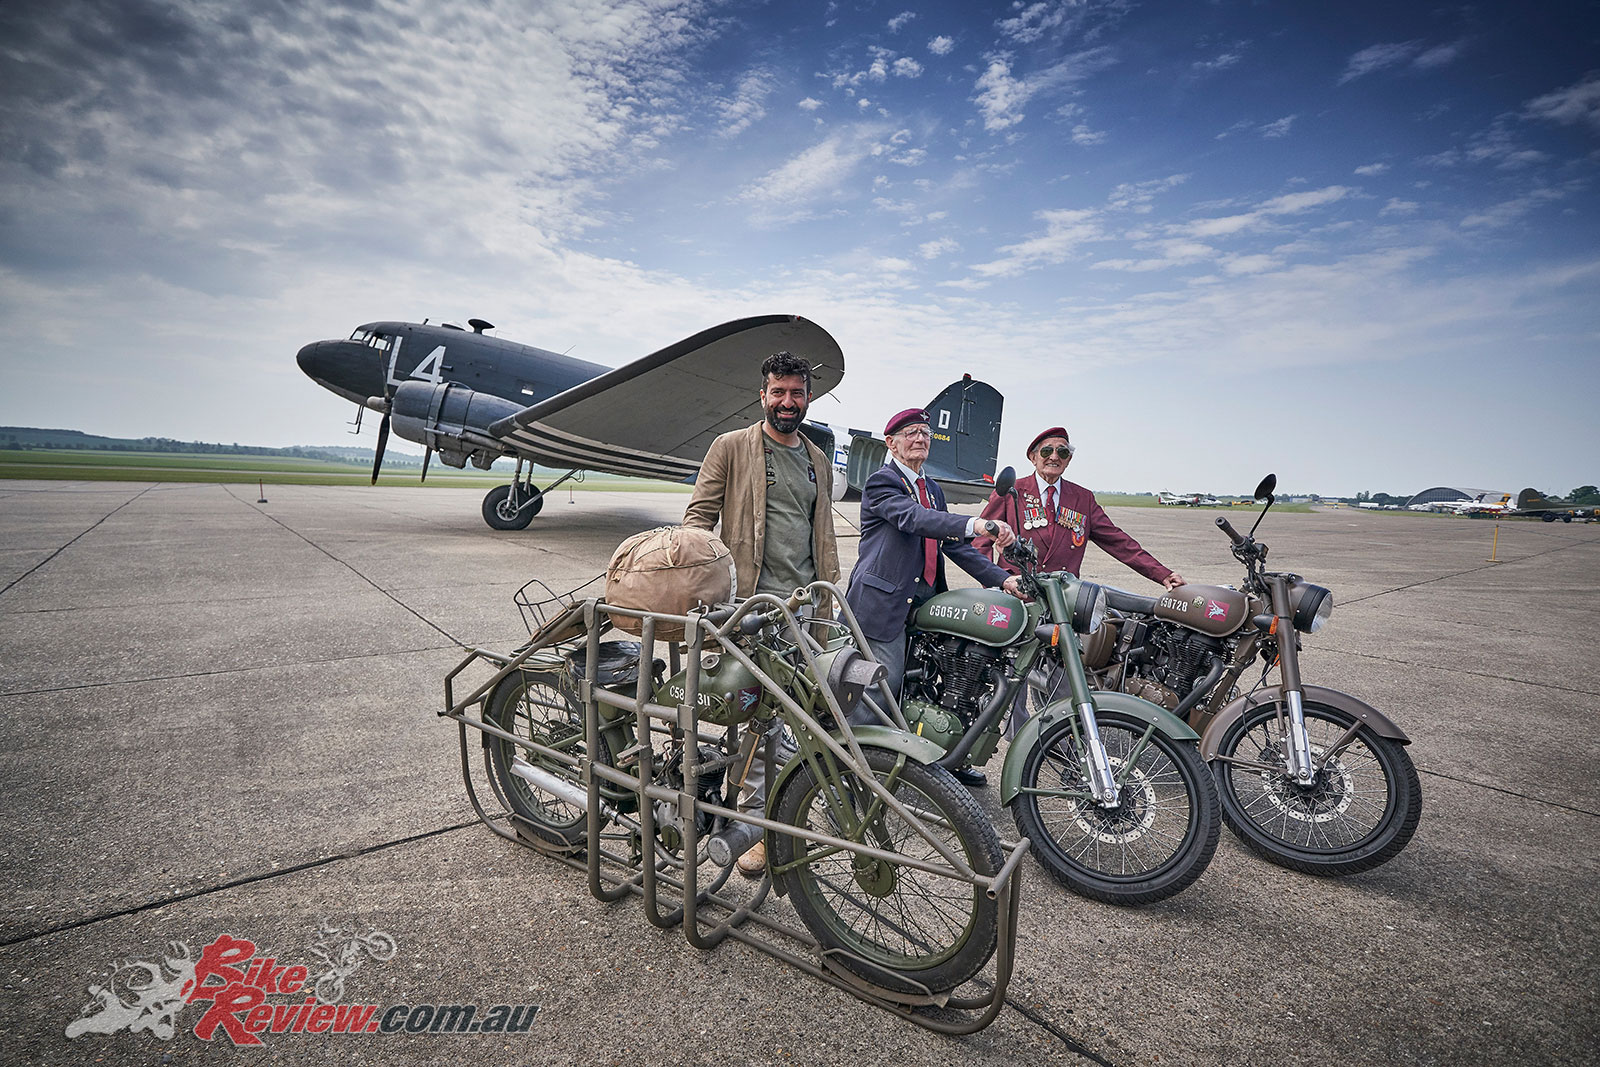 The Pegasus was launched recently in the UK with the historic World War 2 connection and meet with the veterans of the paratrooper regiment who rode Royal Enfield in battle.